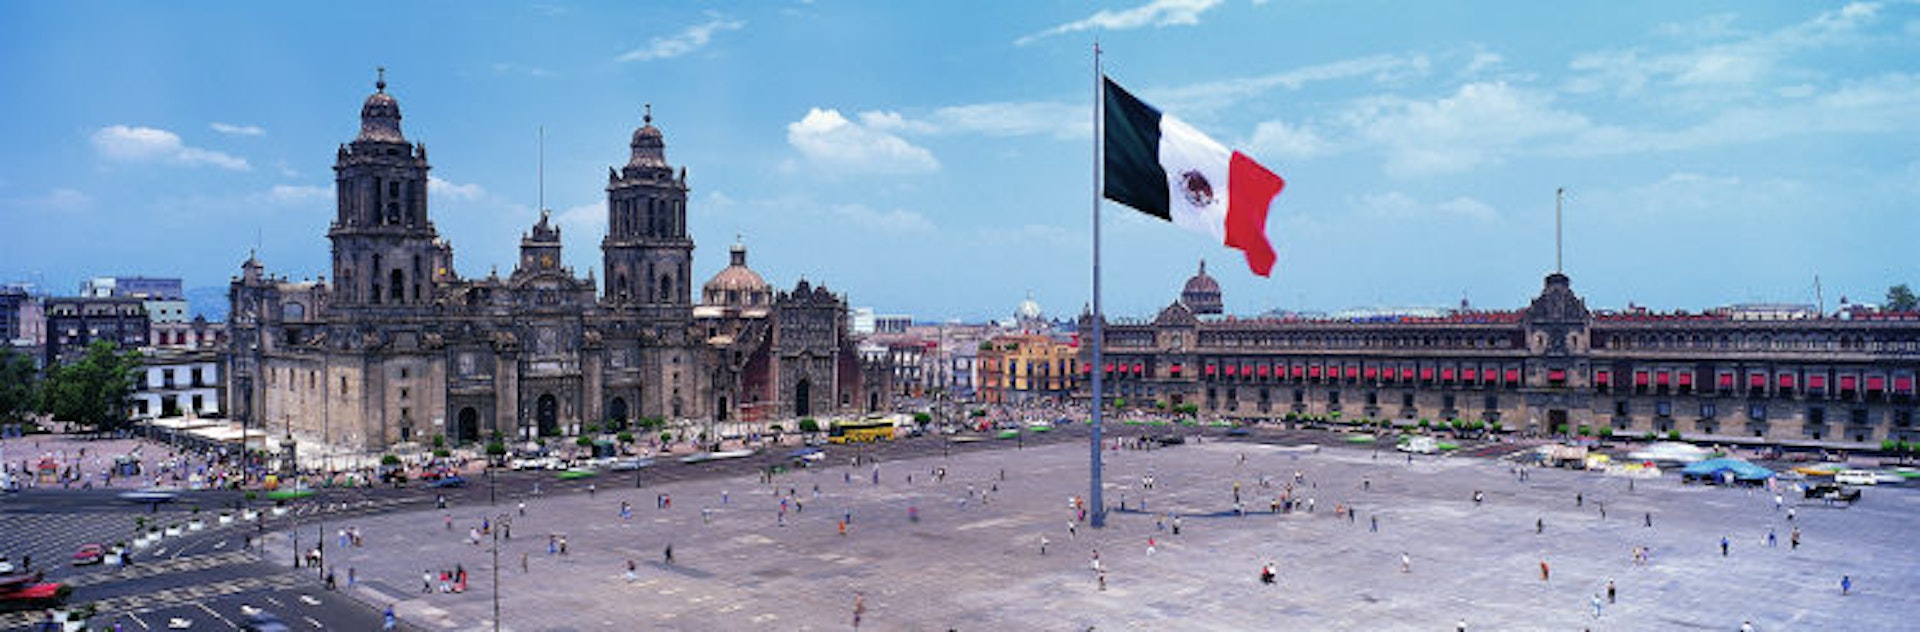 Plaza de la Constitucion aka El Zocalo, is the heart of the Mexico City. Image by Jeremy Woodhouse / Getty Images